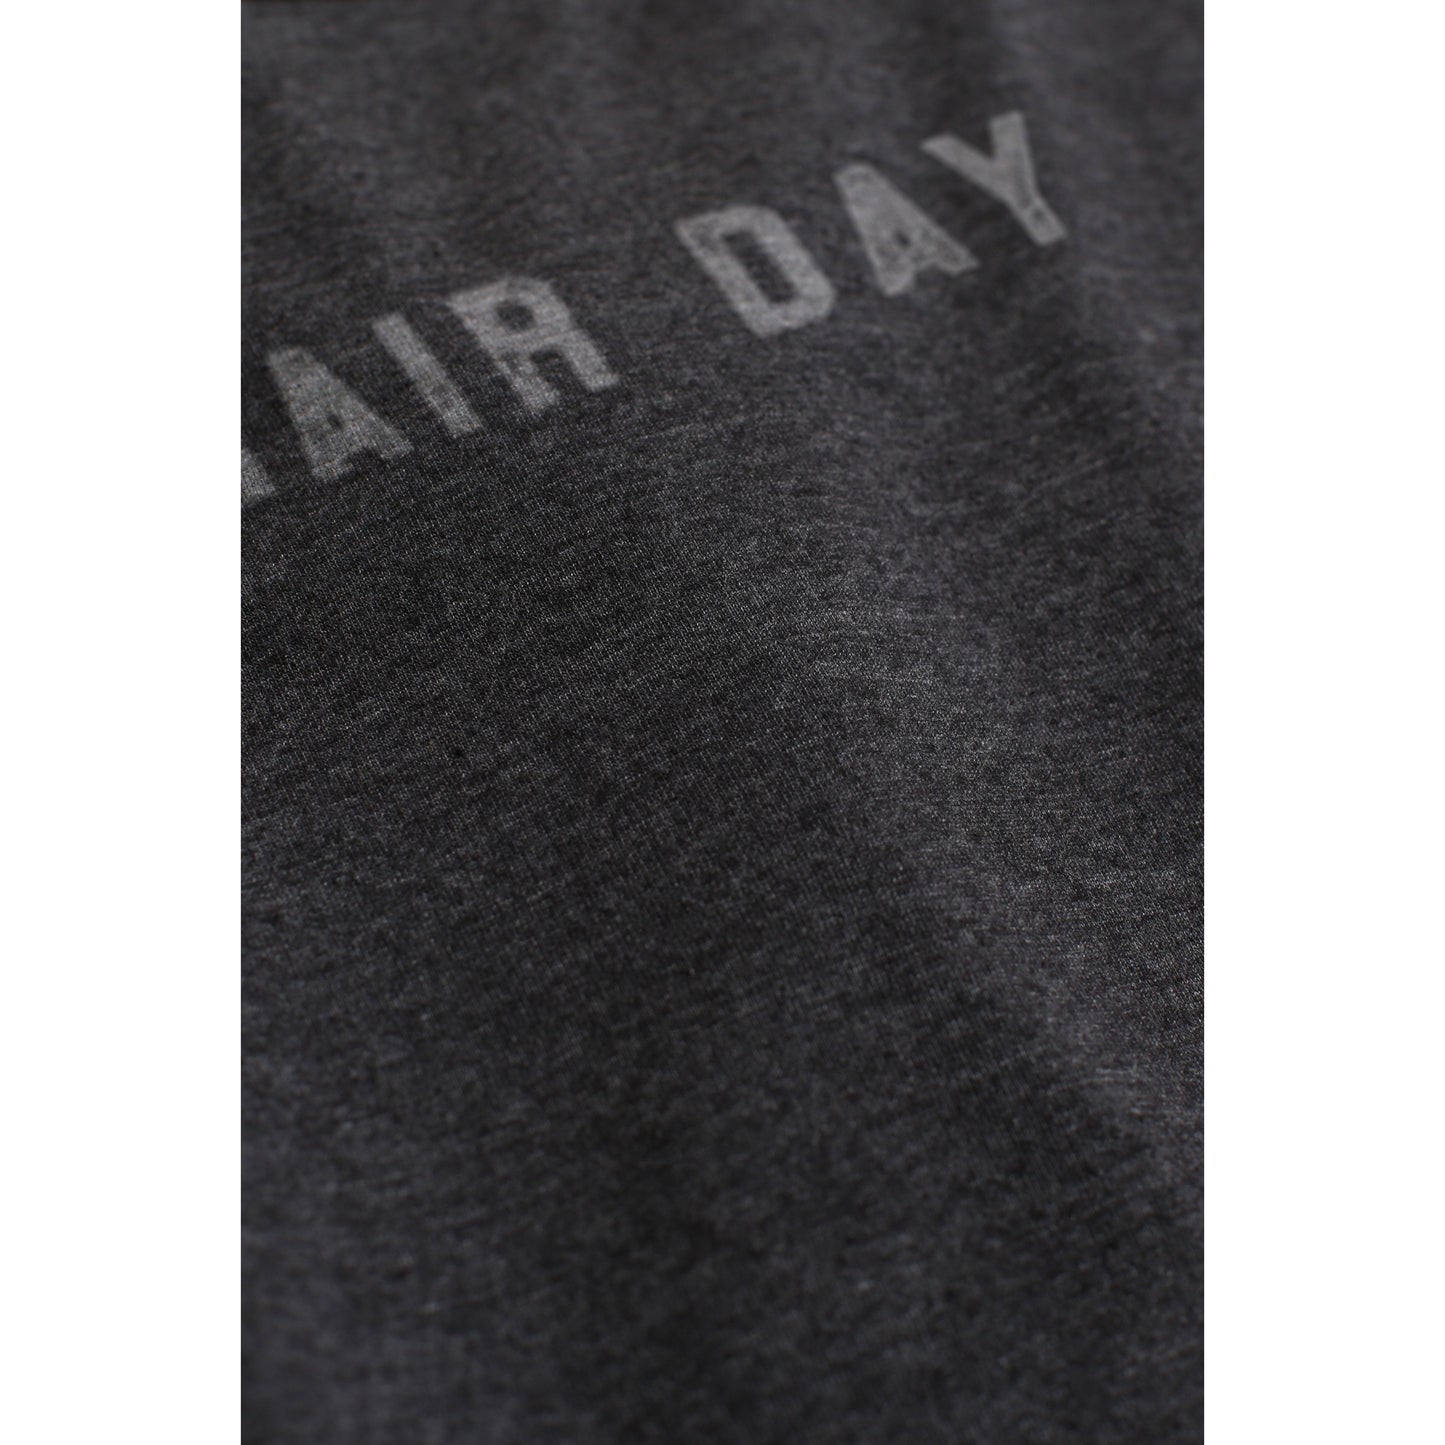 No Hair Day Charcoal Printed Graphic Men's Crew T-Shirt Tee Closeup Details